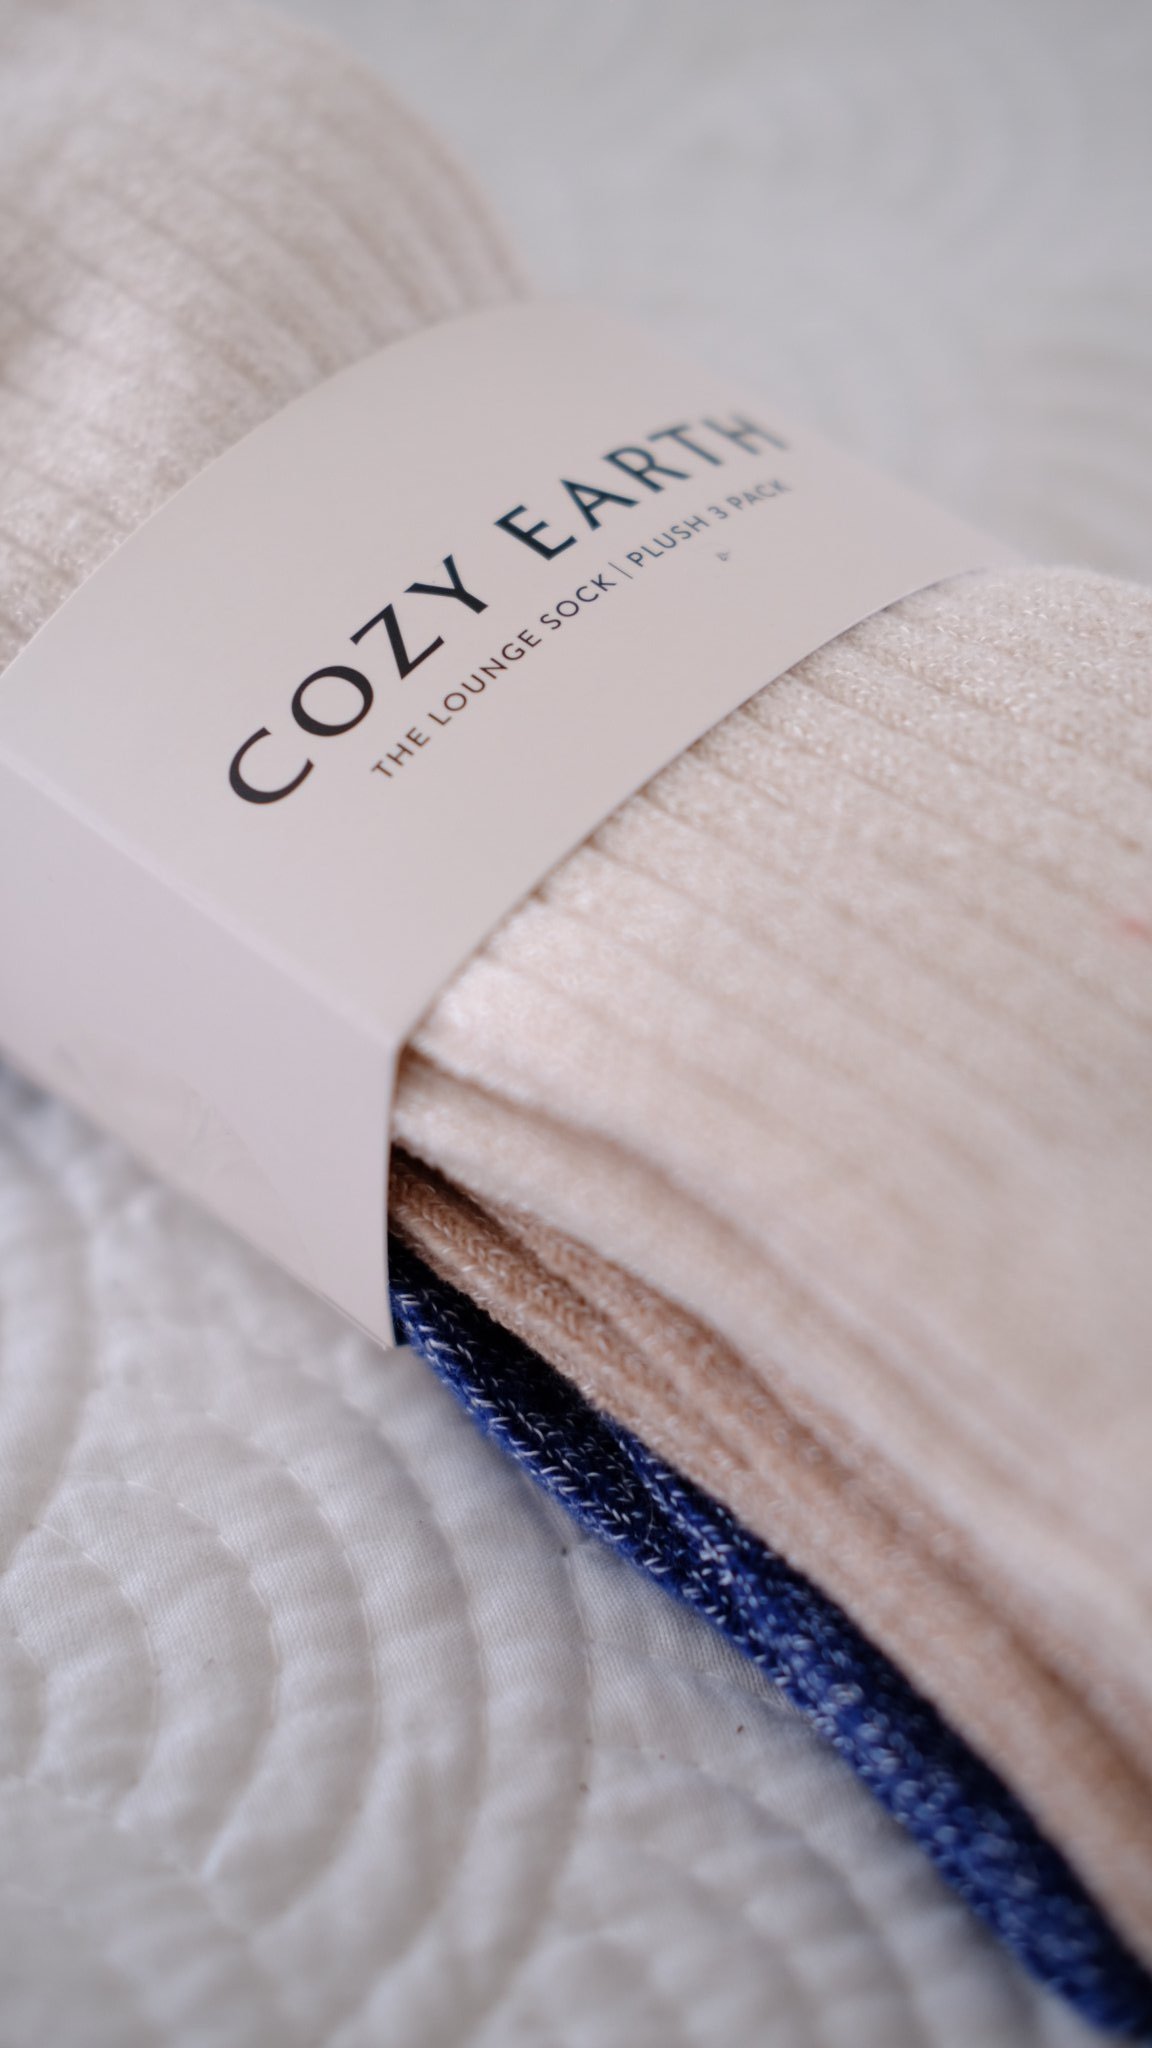 In this Cozy Earth socks review, I’m going to share all the details on Cozy Earth socks including is Cozy Earth worth it, where to buy Cozy Earth socks and a Cozy Earth socks size chart. I’ll also share a 40% off Cozy Earth promo code